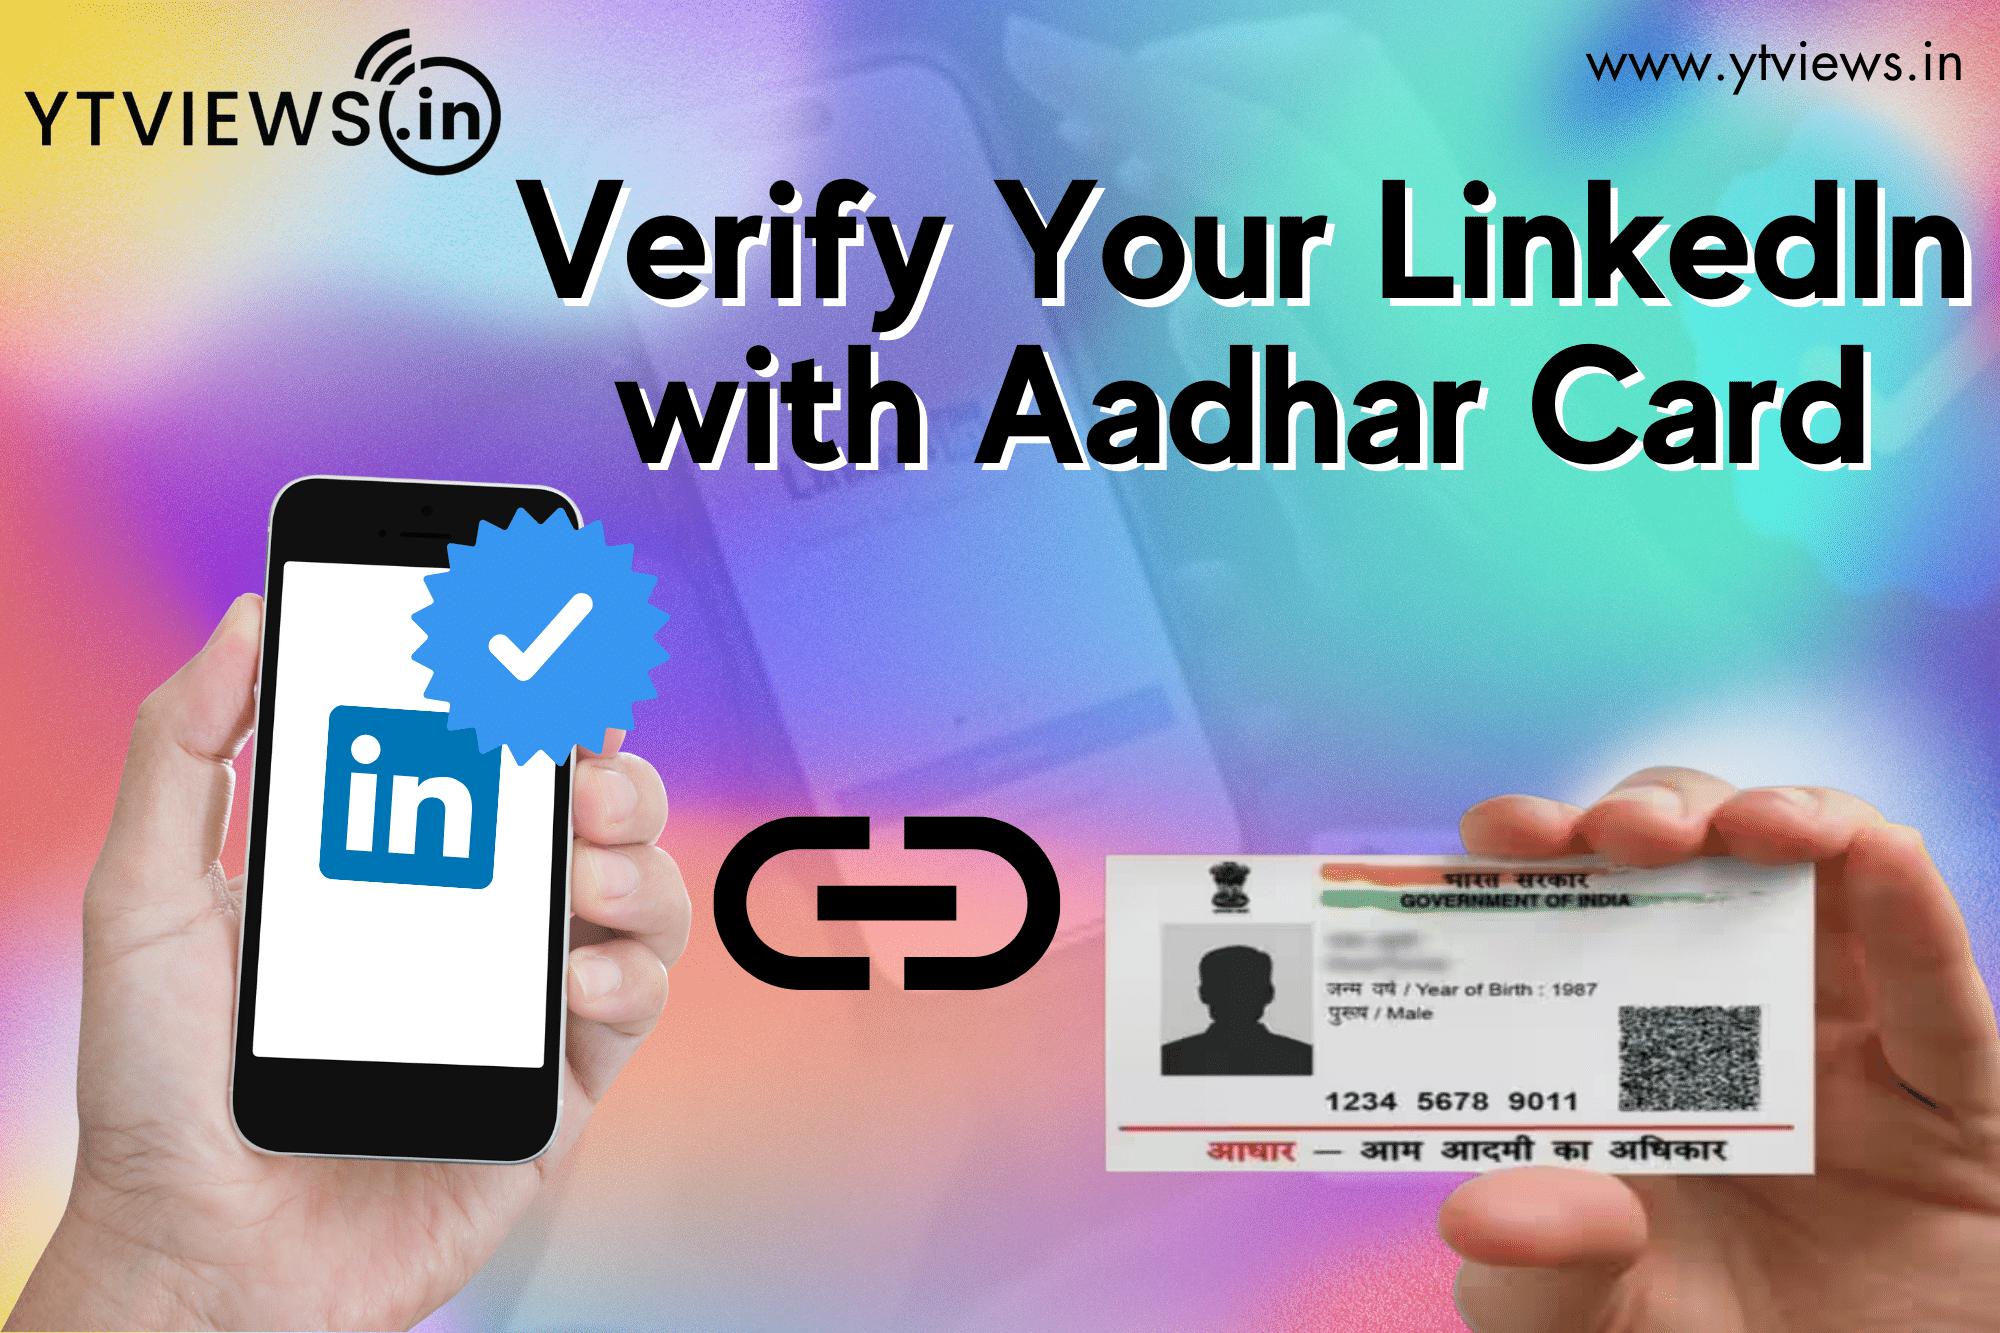 Your LinkedIn profile can now be verified using your Aadhar Card